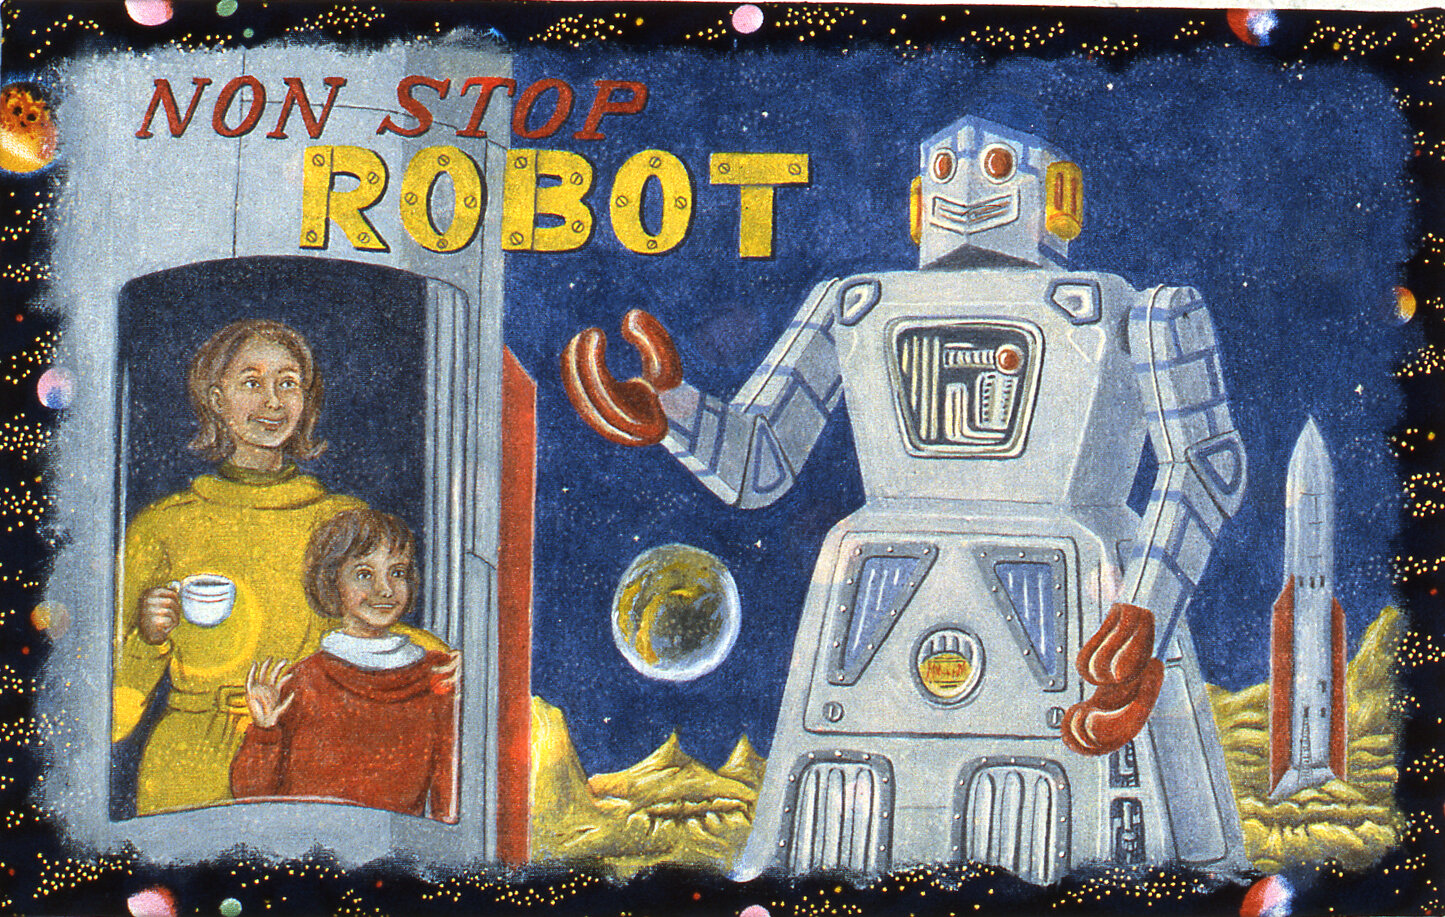   Non Stop Robot   8”x13”  acrylic on commercially printed fabric  1996  PRIVATE COLLECTION 